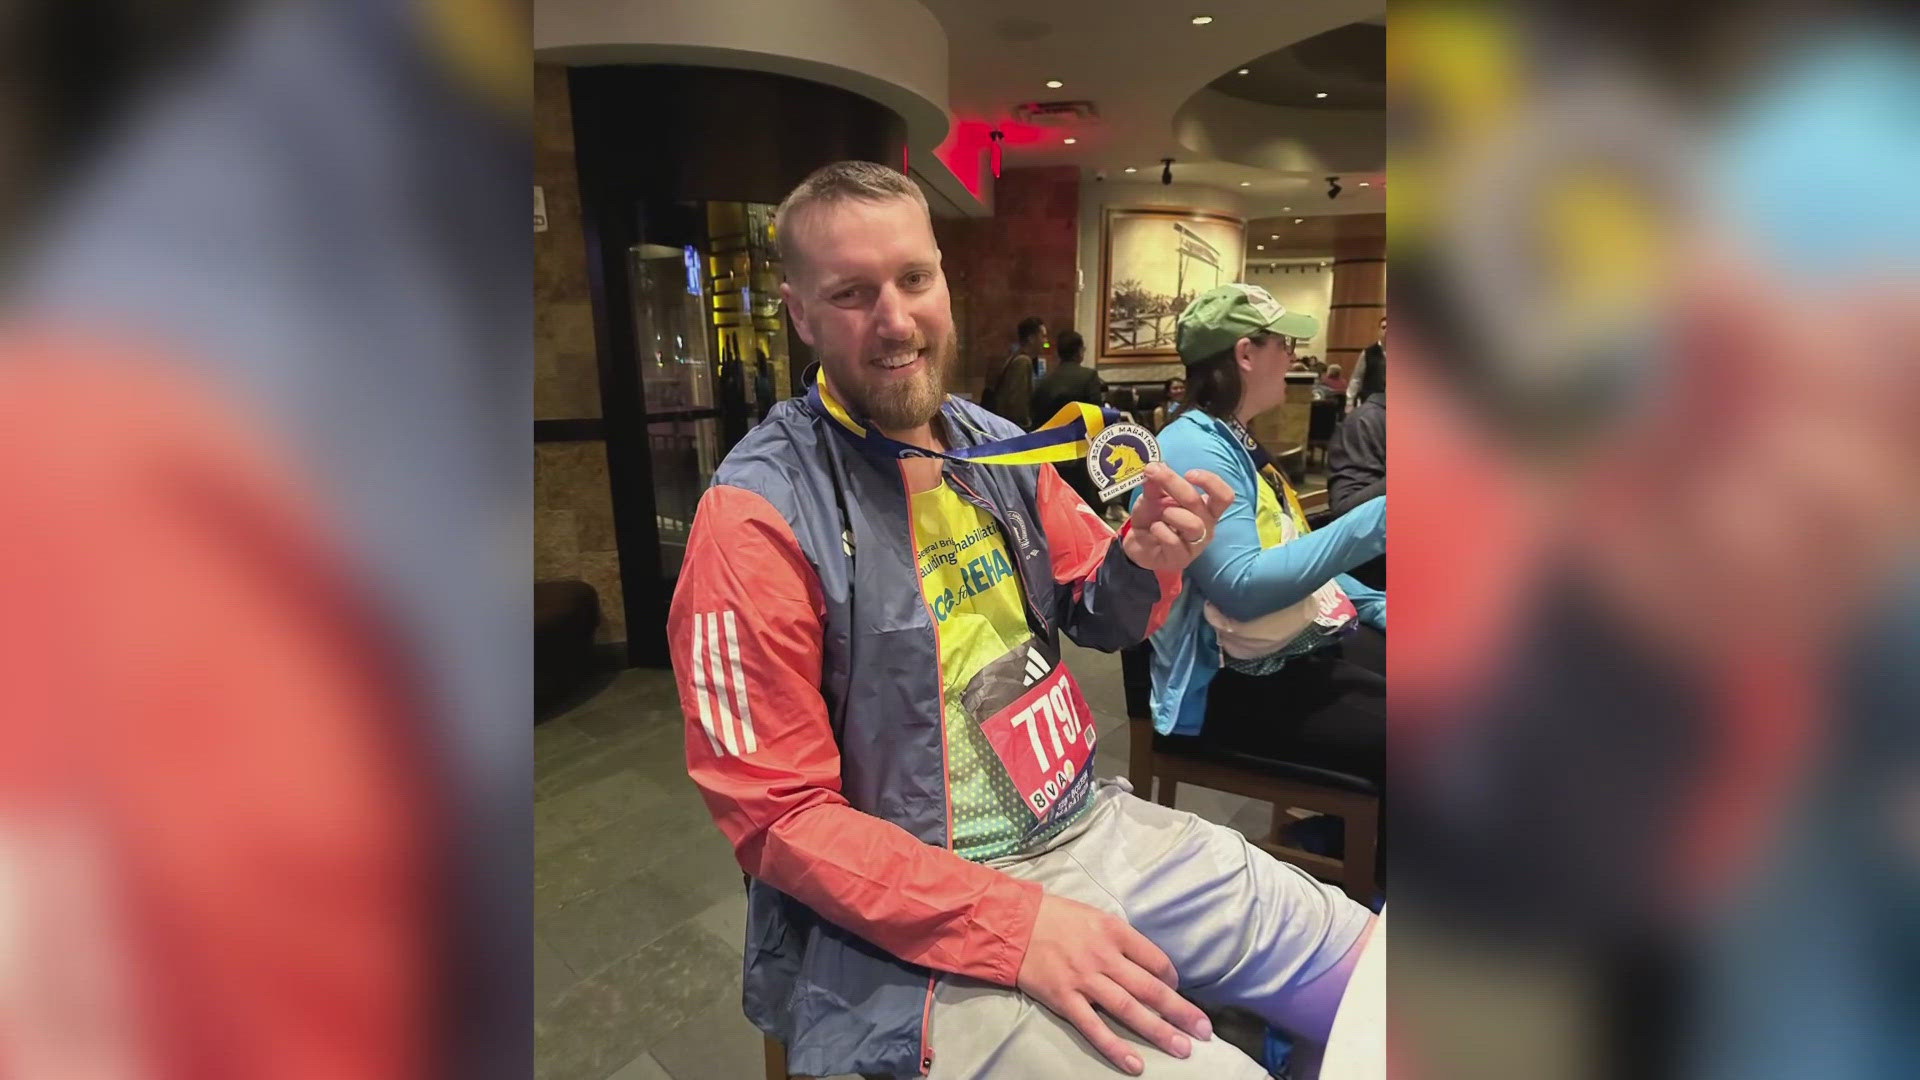 Dylan Woodhouse was told he had a less than 10 percent chance of ever walking again. Last month, he walked 26.2 miles to the Boston Marathon finish line.